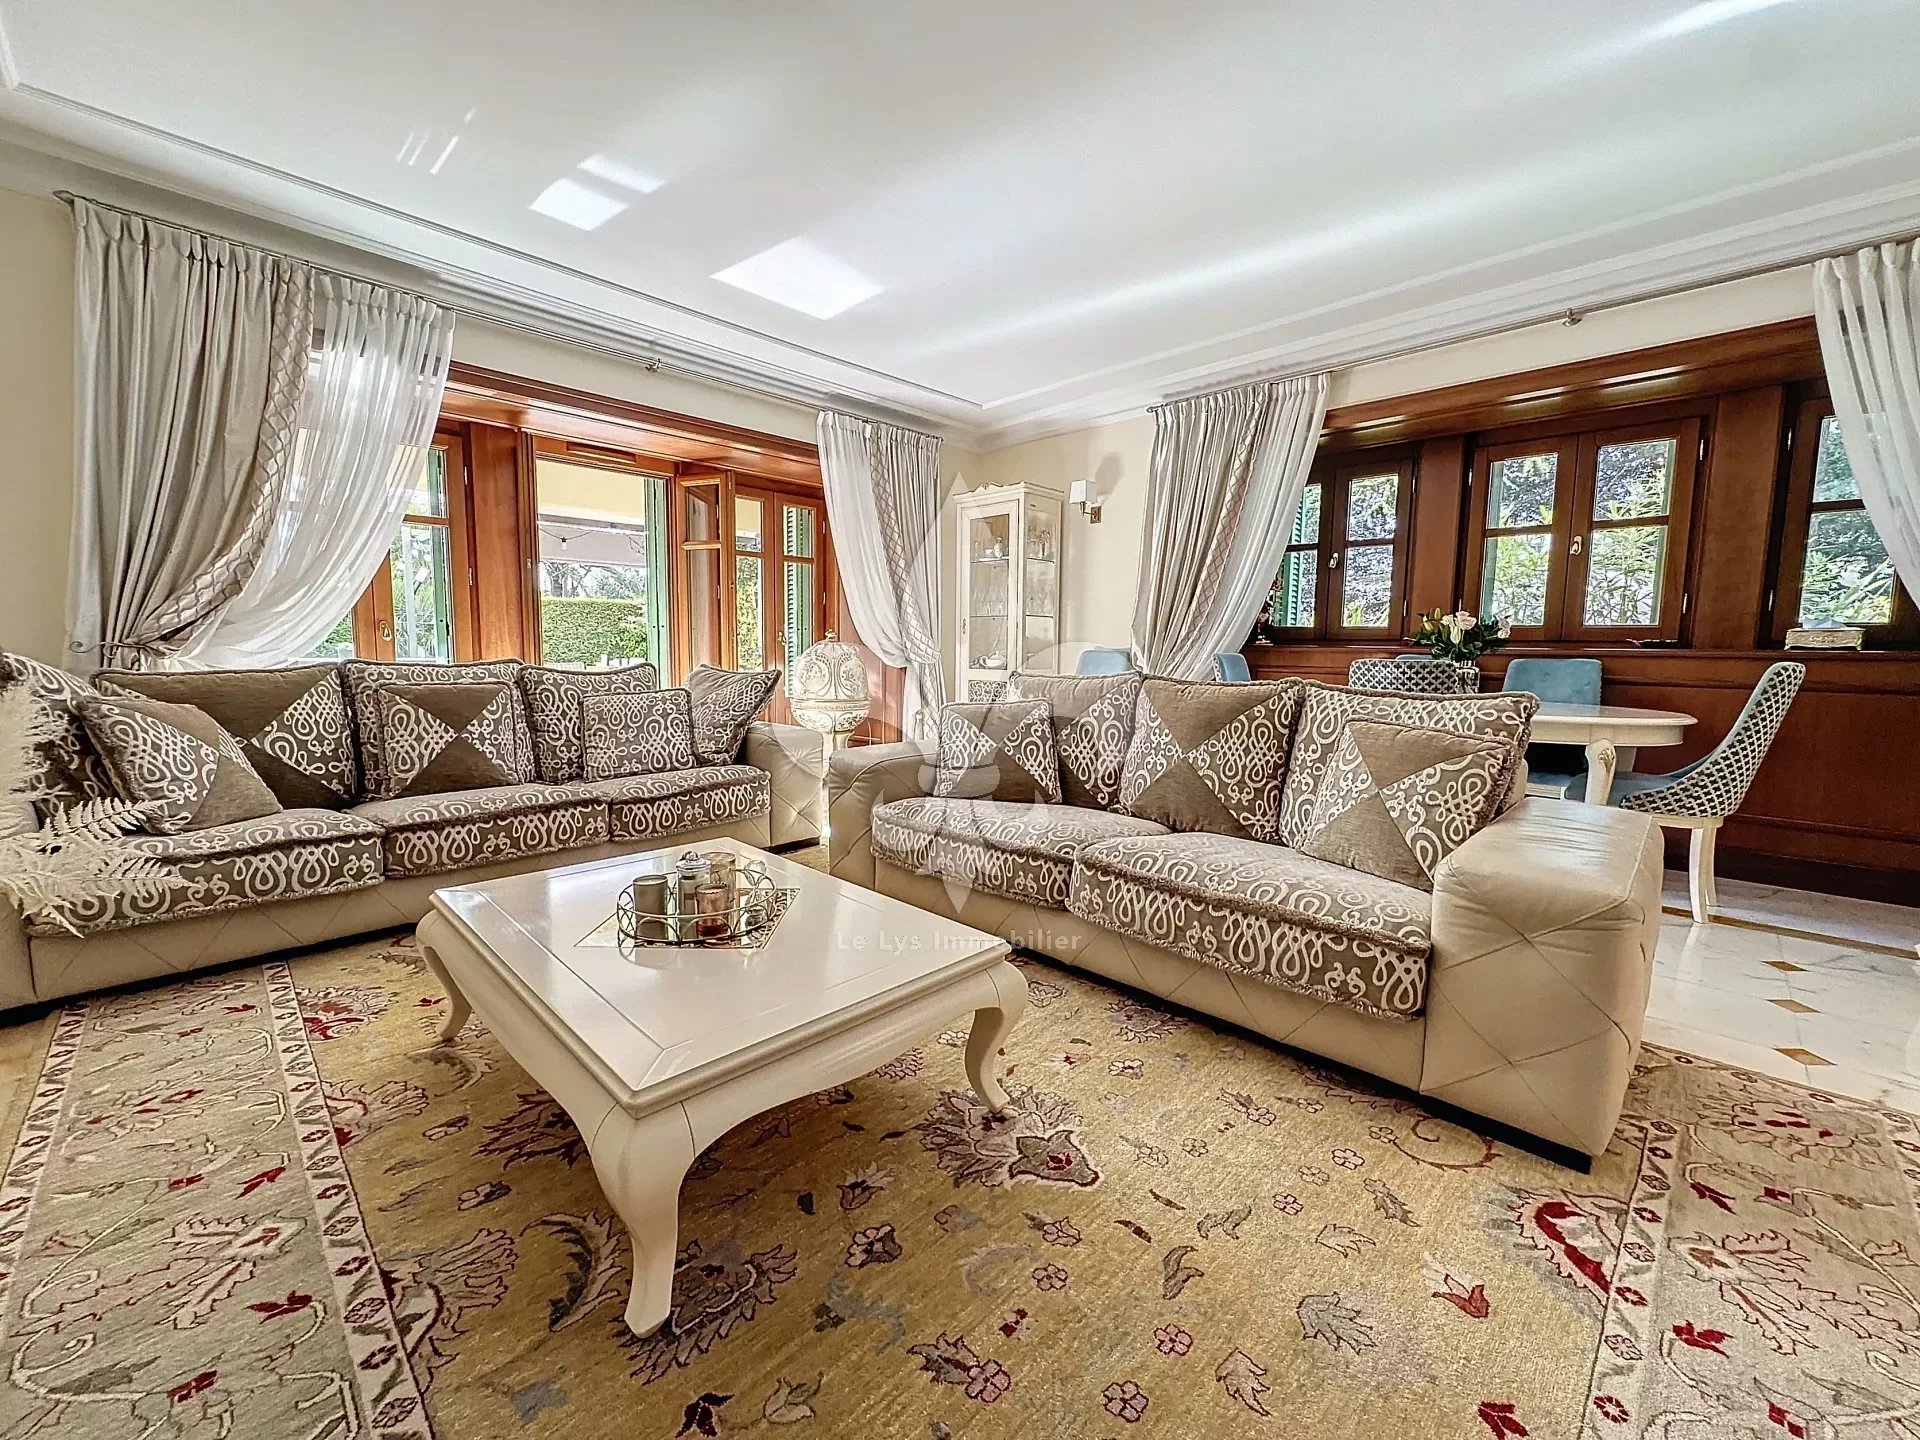 Cannes - Oxford: Magnificent ground floor apartment in a luxury residence